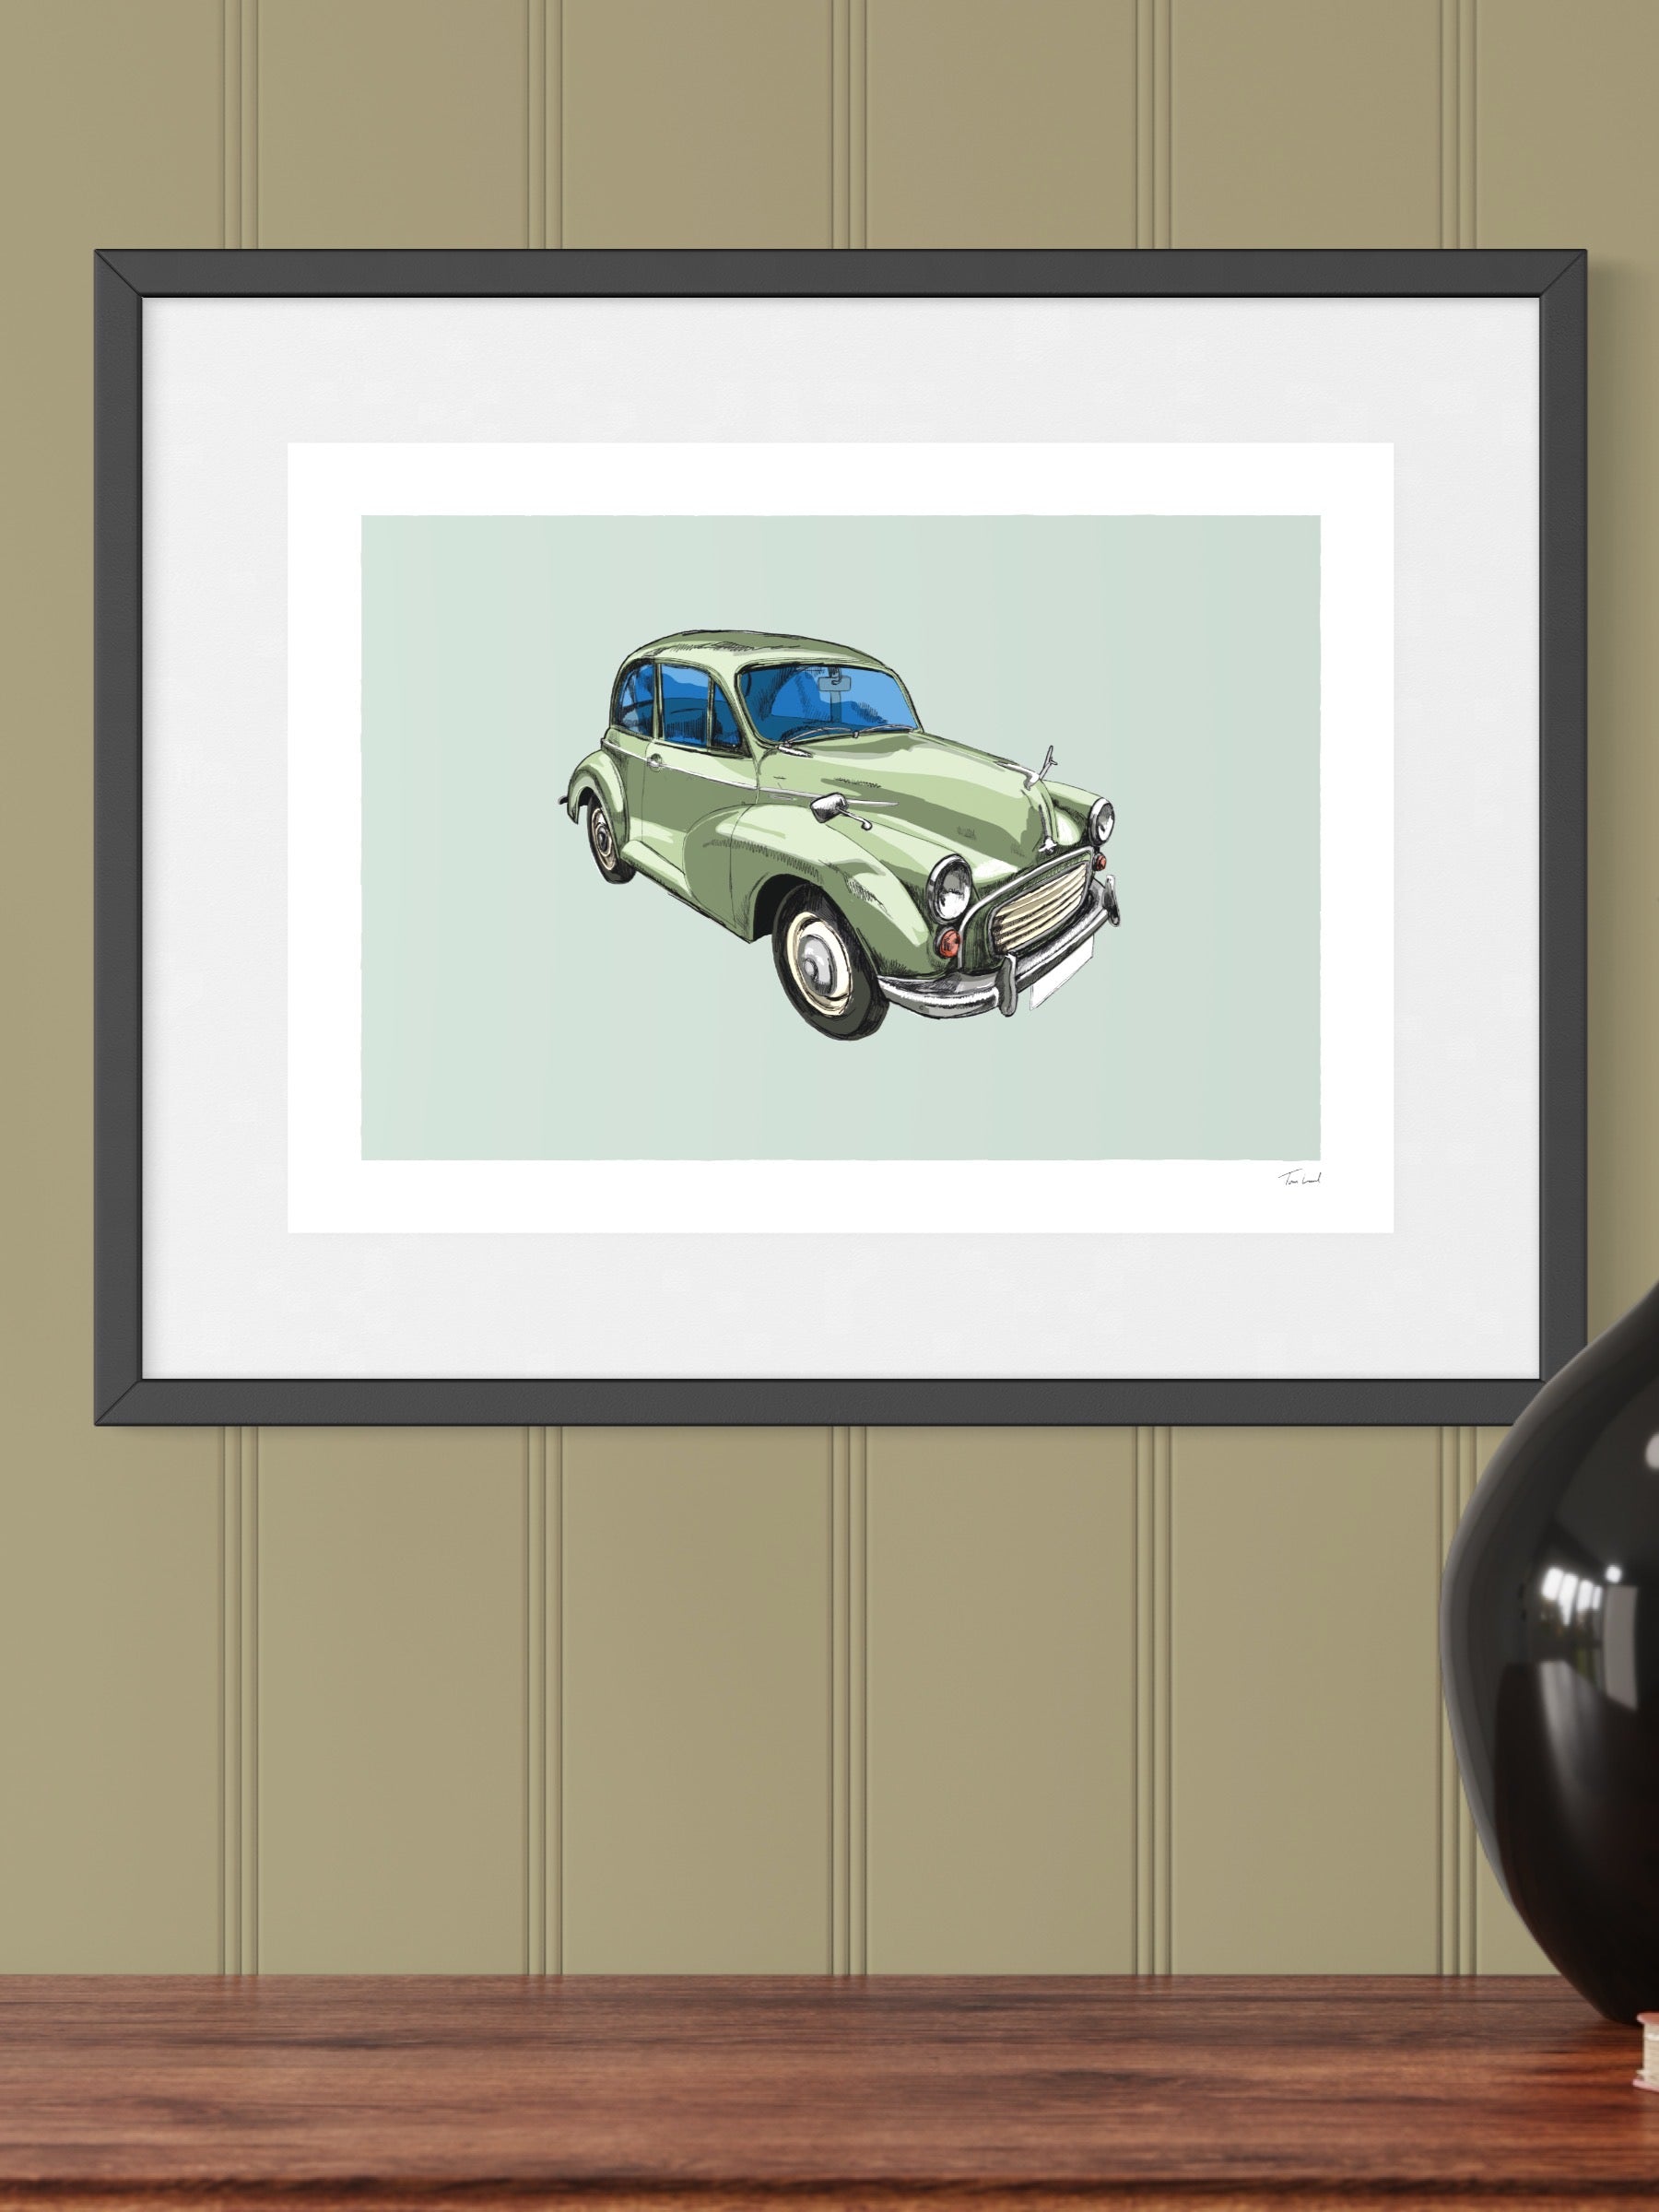 This image shows a giclee wall art print by Tom Laird Illustration of the British classic car, the Morris Minor, framed in a beautiful living room with tasteful modern home decor. This art print of a green example is available from Tom Laird Illustration in a variety of sizes.